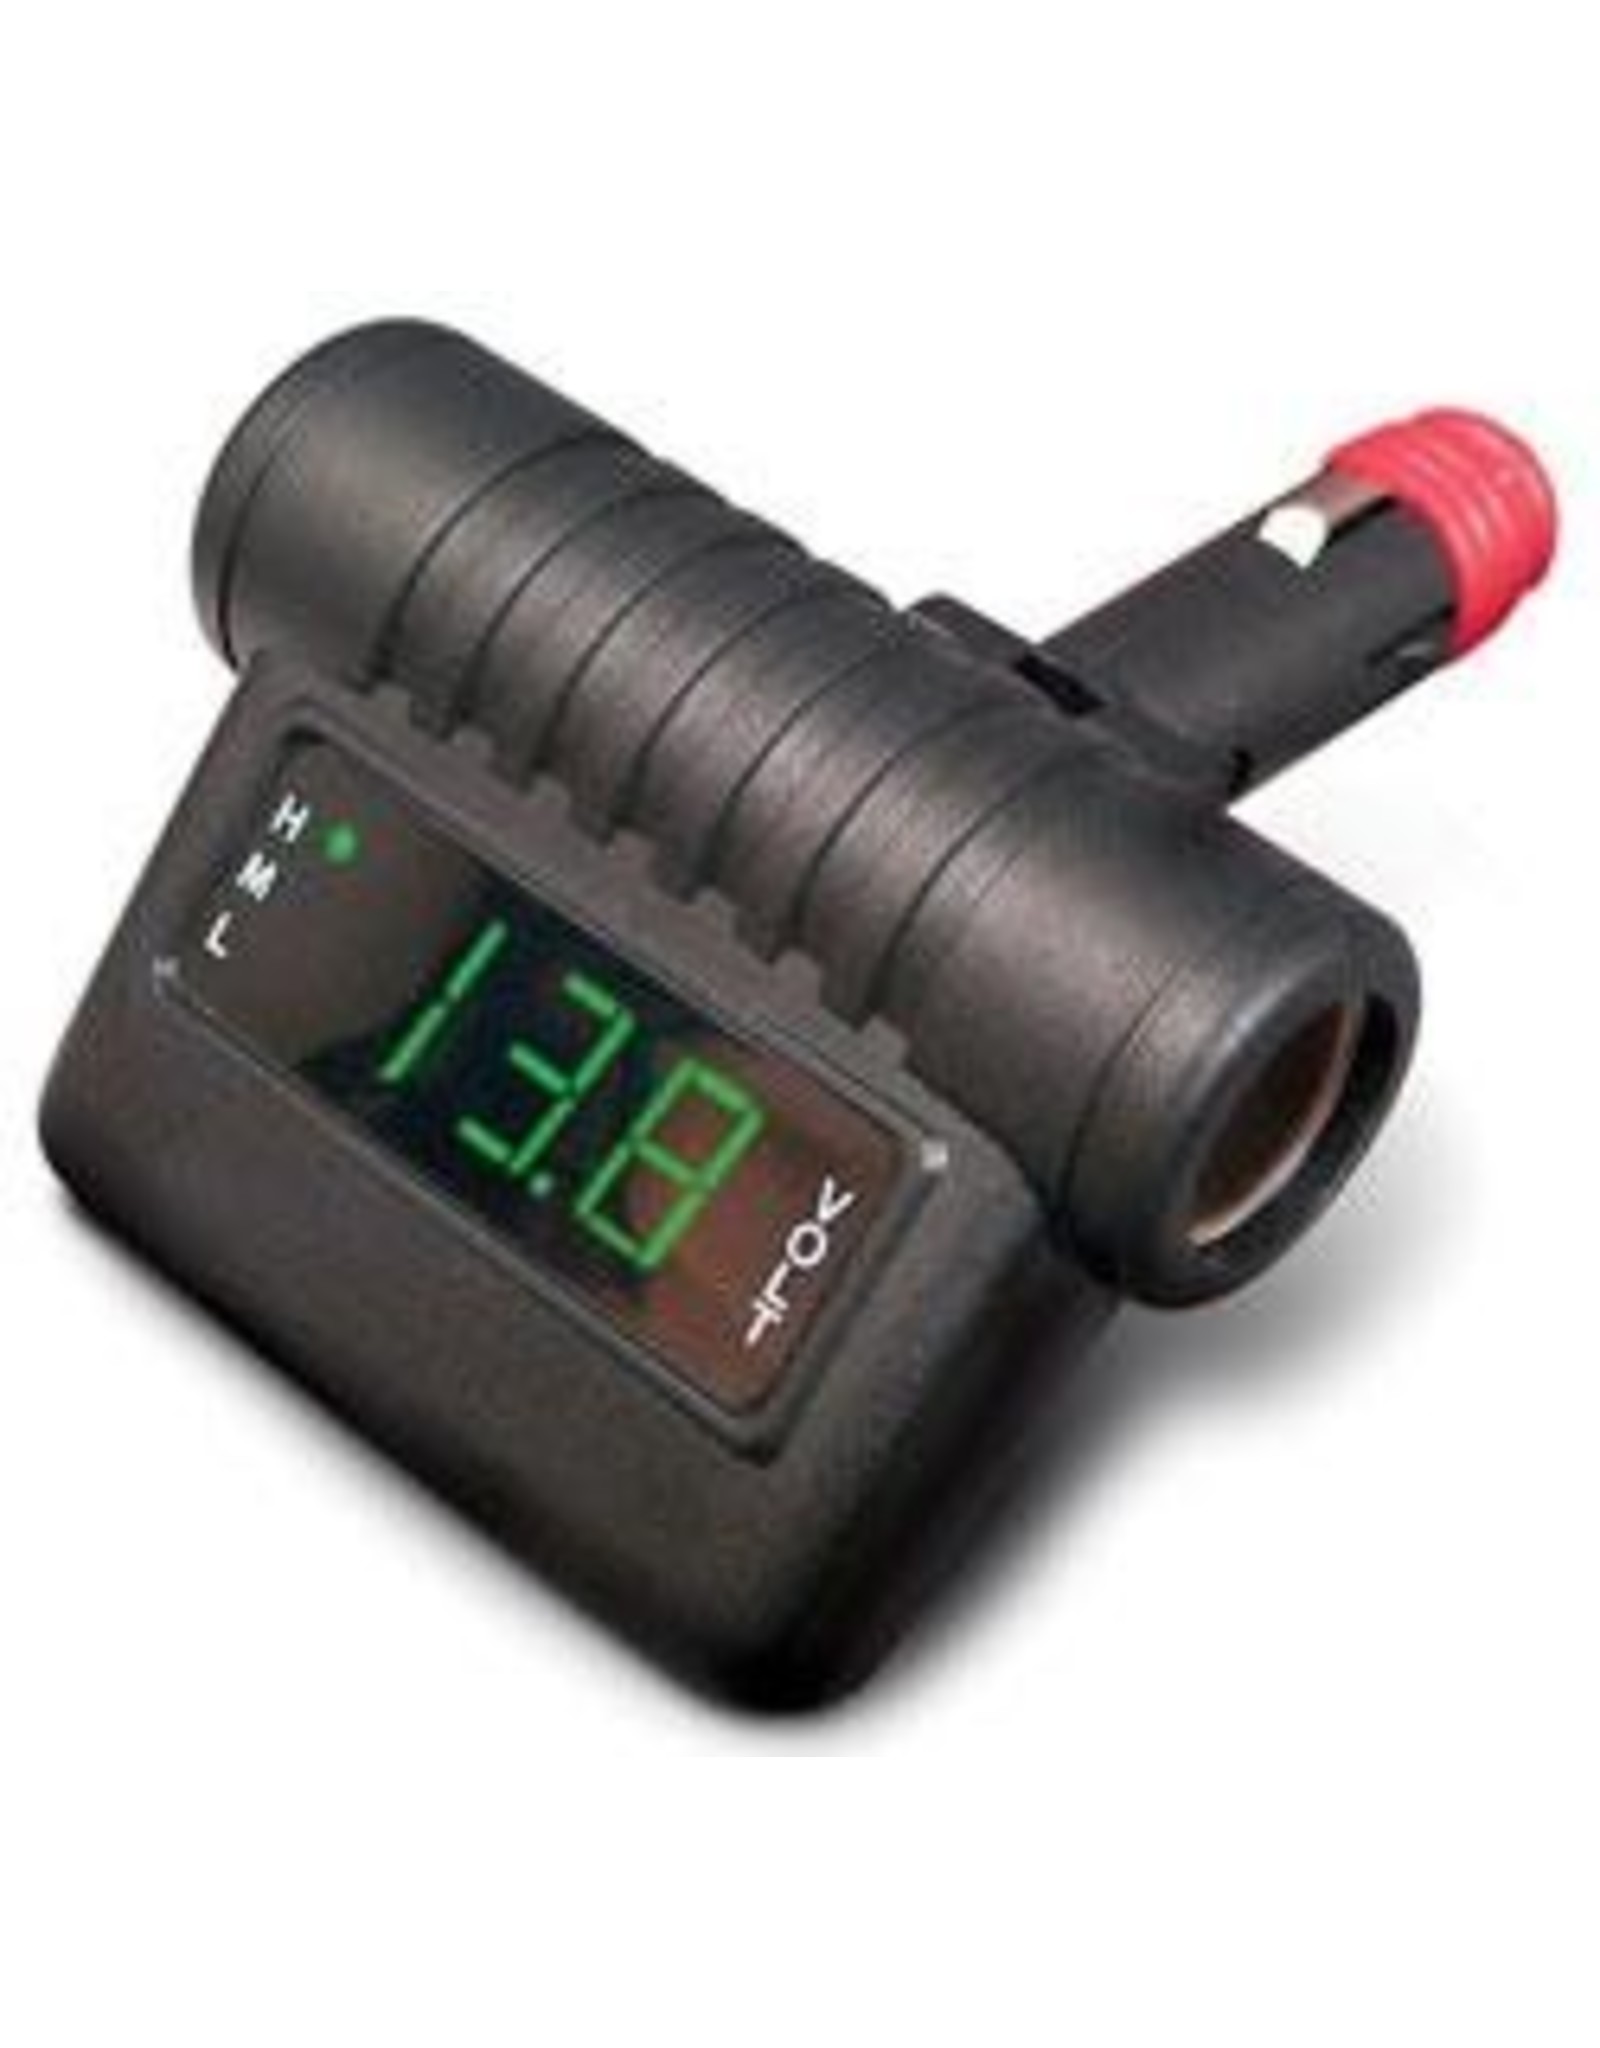 Digital Voltage Meter and USB Charger